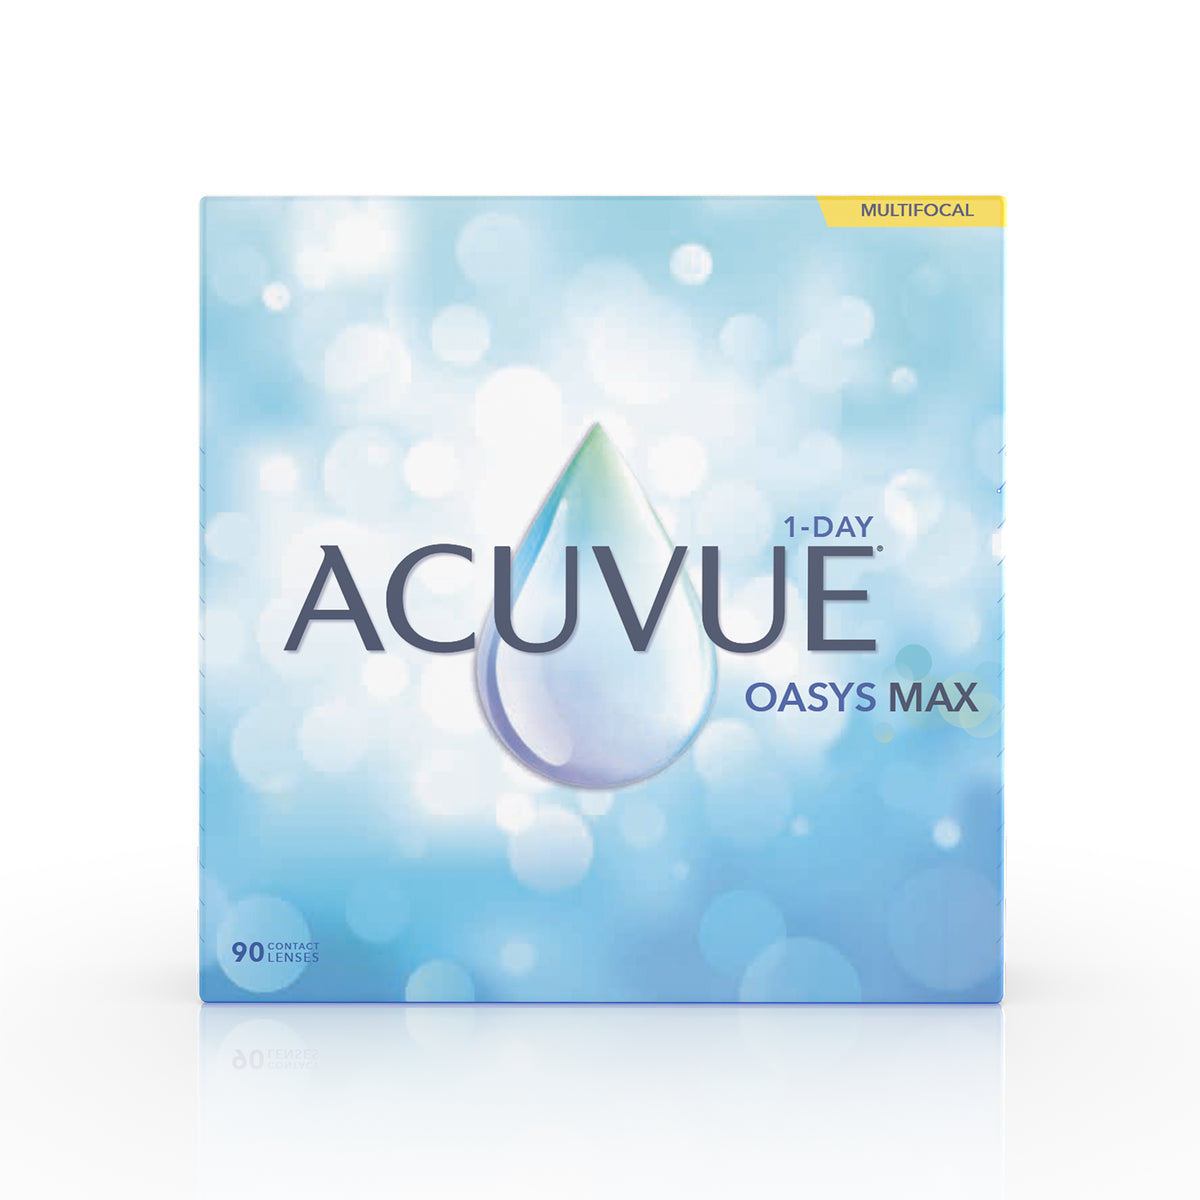 Acuvue Oasys Max 1 Day Multifocal 90 Contact Lenses Johnson & Johnson   